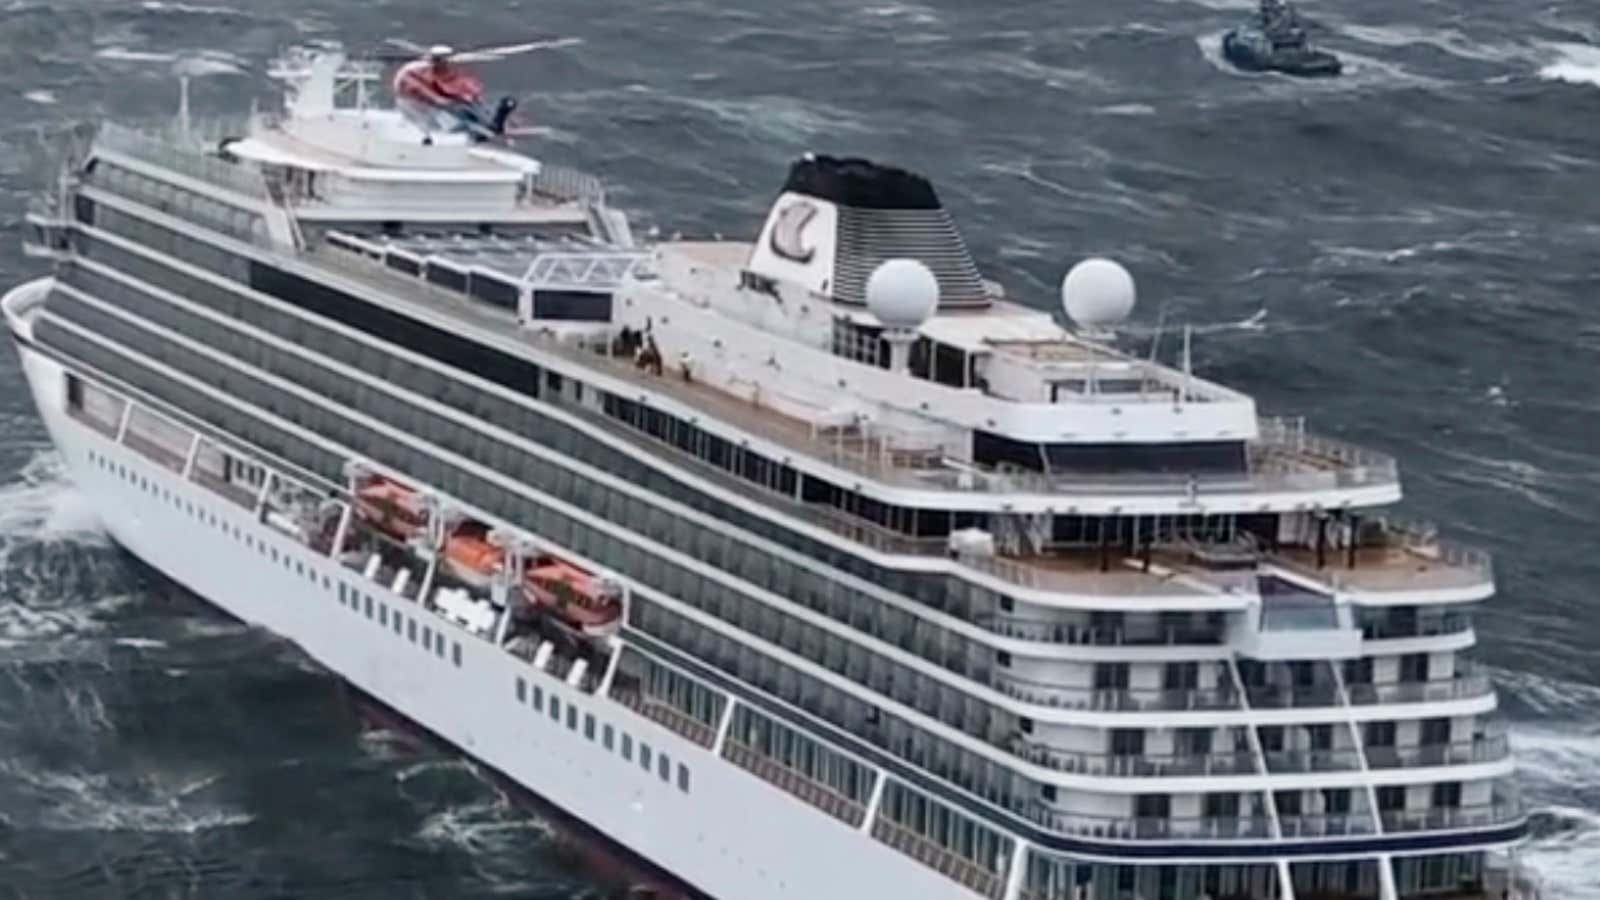 The Viking Sky, as seen from a helicopter.